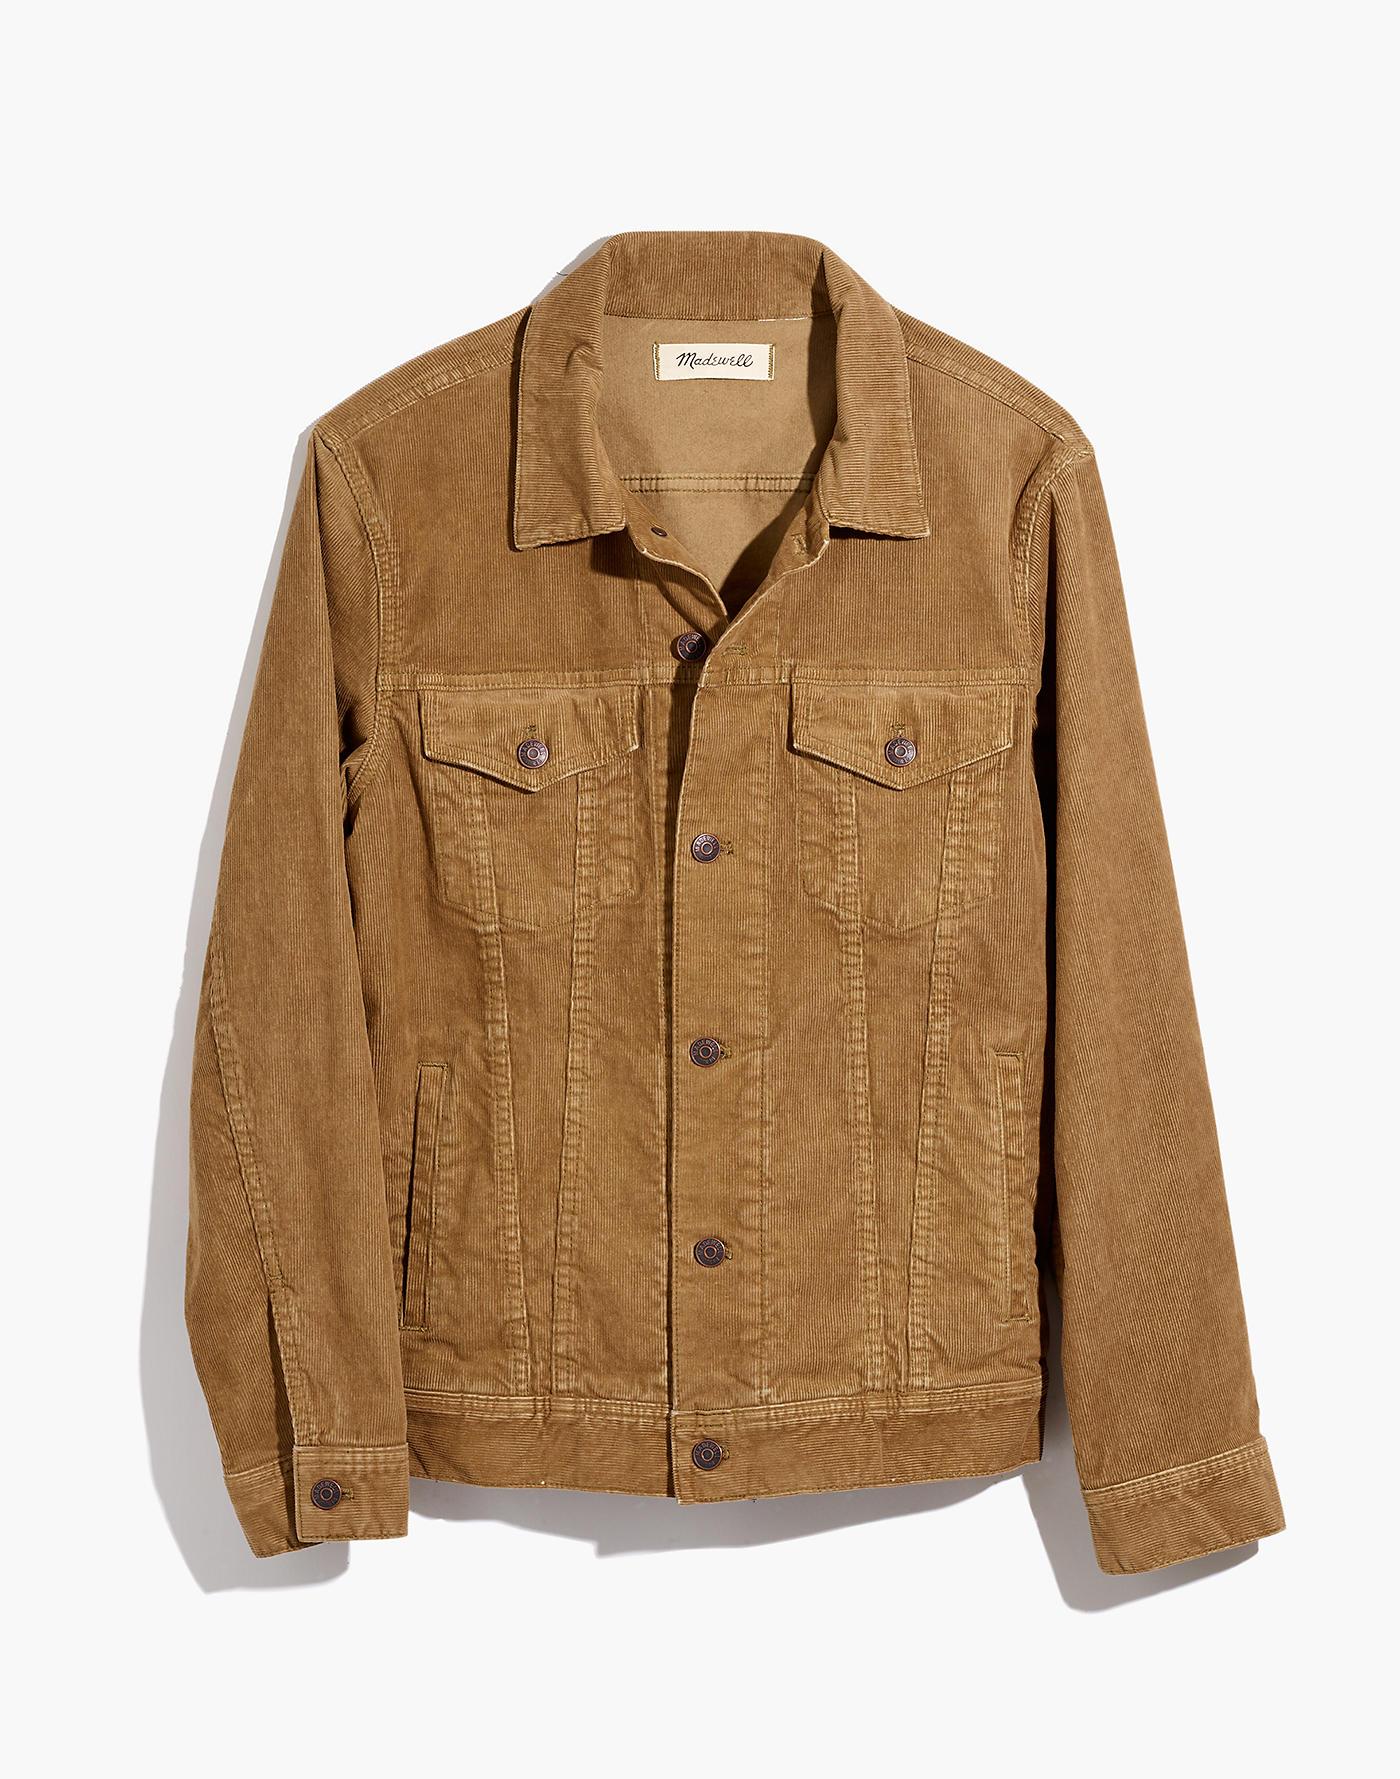 Madewell Classic Jean Jacket: Corduroy Edition for Men - Lyst